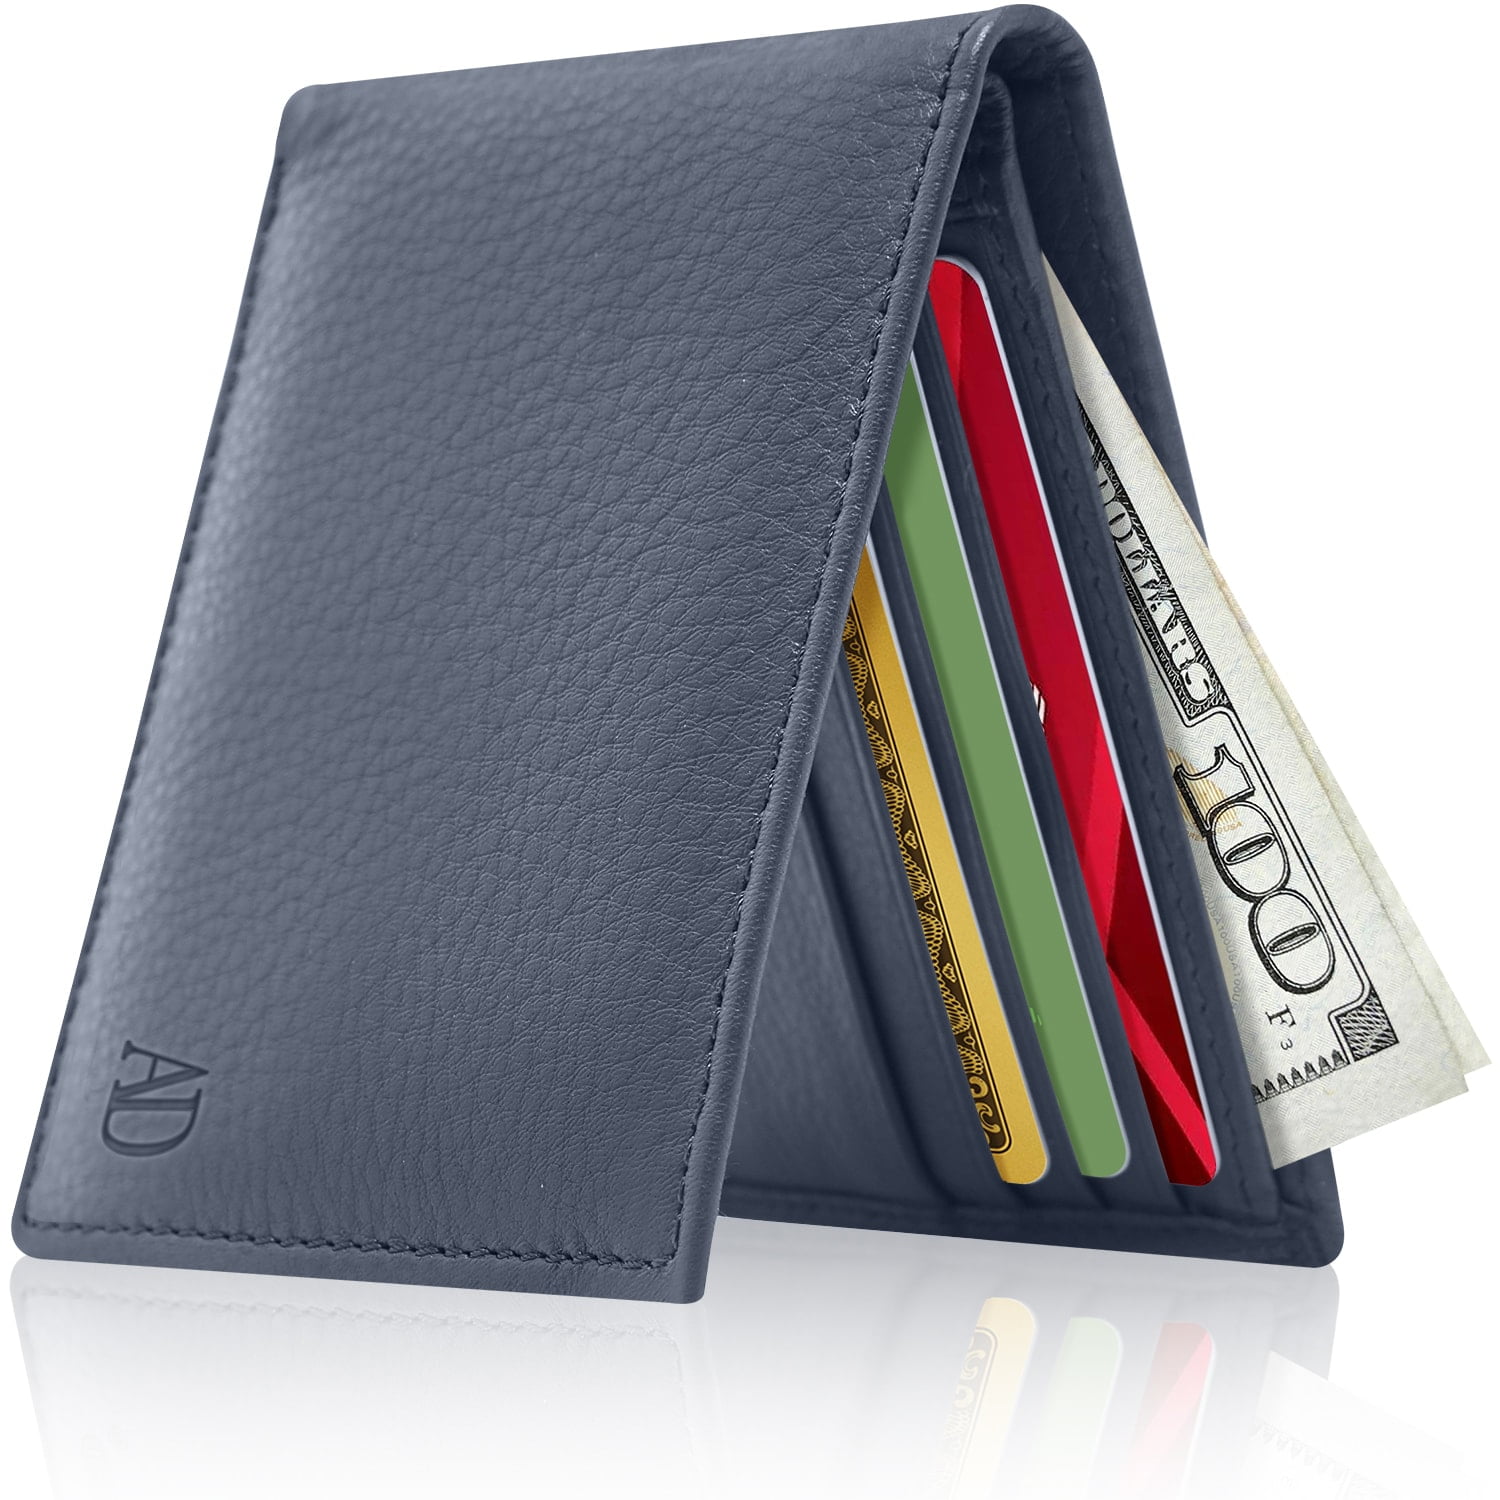 Slim Leather Bifold Wallets For Men - Minimalist Small Thin Mens Wallet 